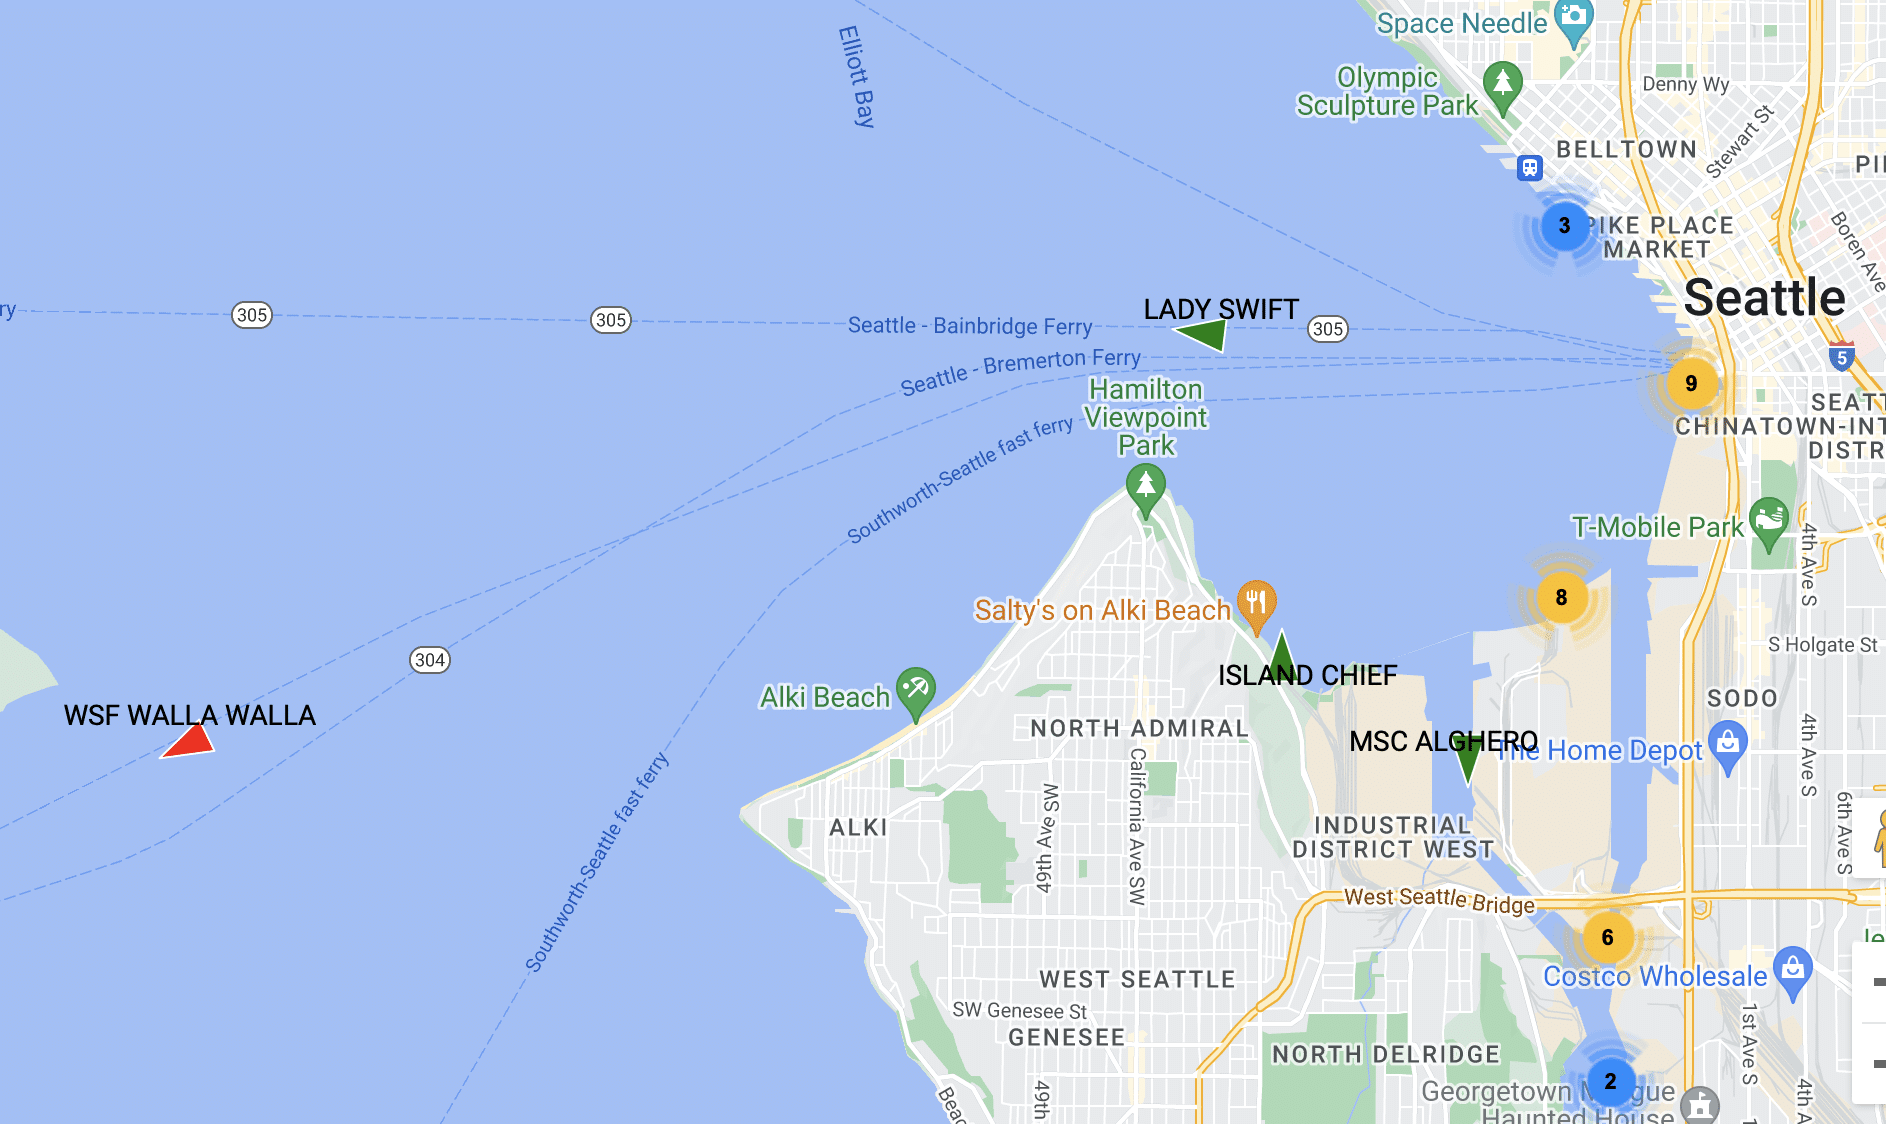 Ship positions in Elliot Bay, Seattle, as shown in our FileMaker AIS Prototype